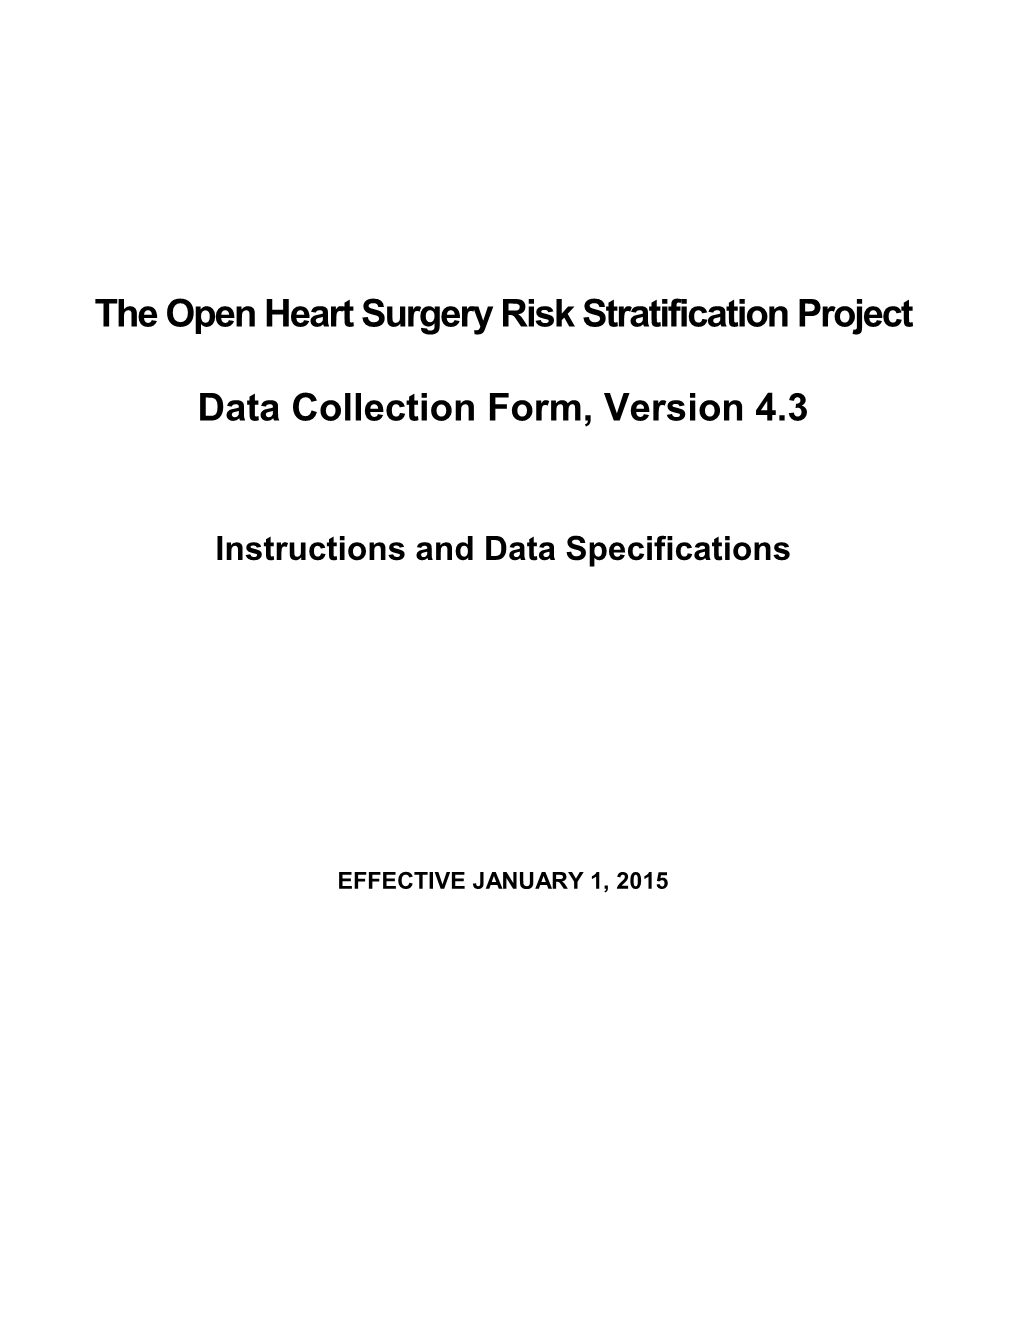 The Open Heart Surgery Risk Stratification Project